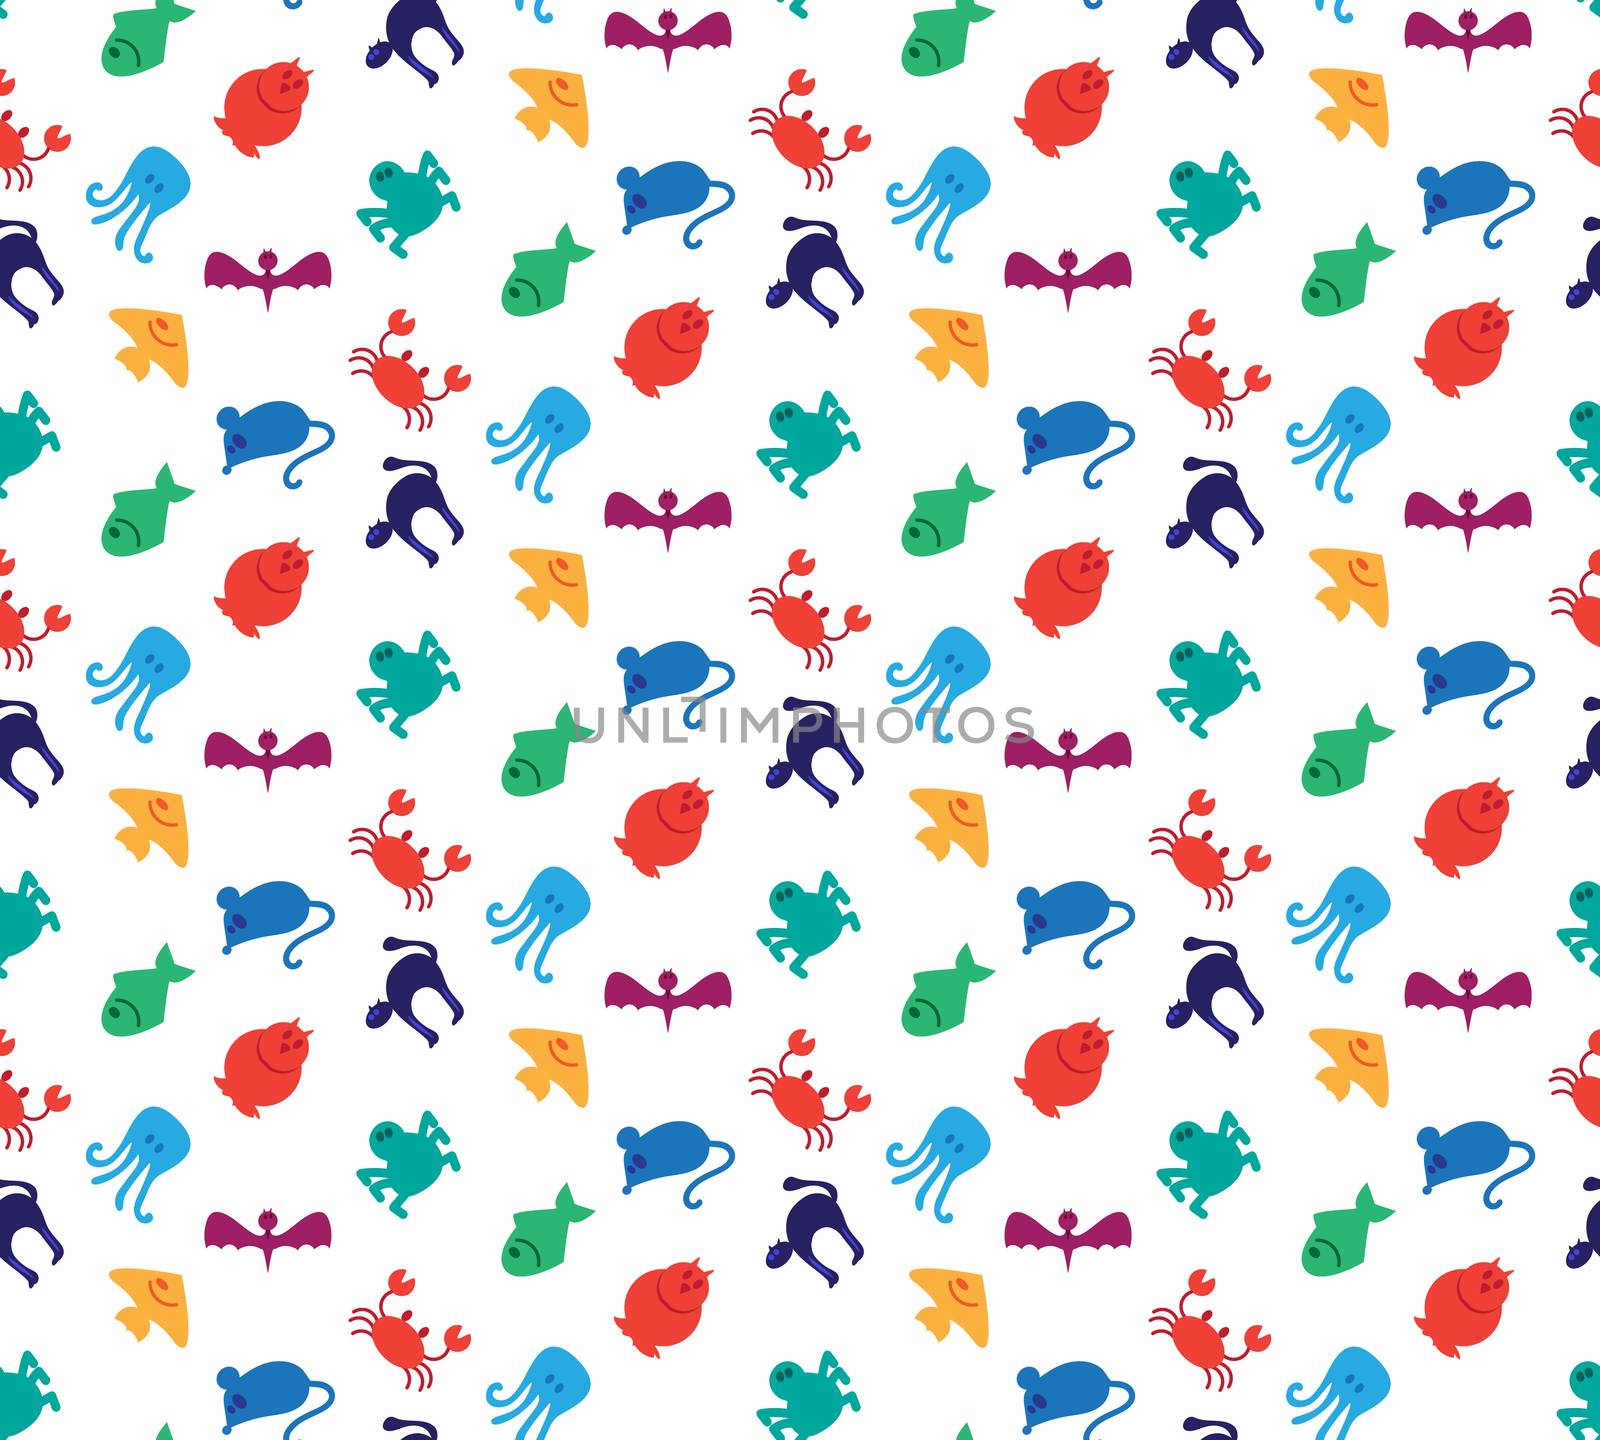 Animals icons seamless pattern by barsrsind